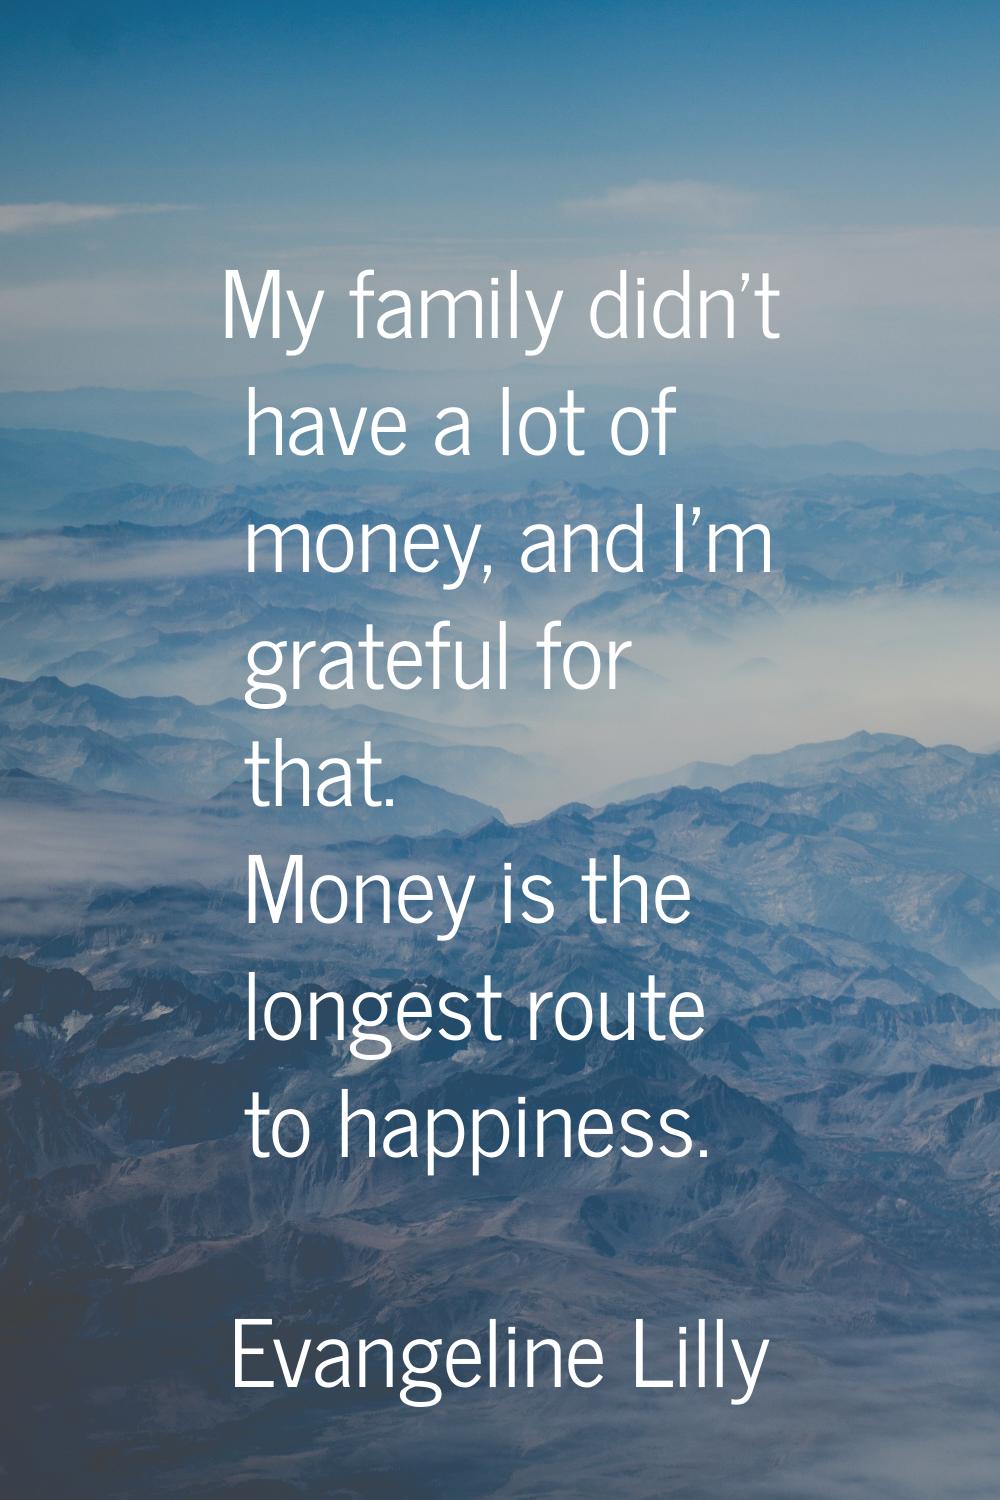 My family didn't have a lot of money, and I'm grateful for that. Money is the longest route to happ